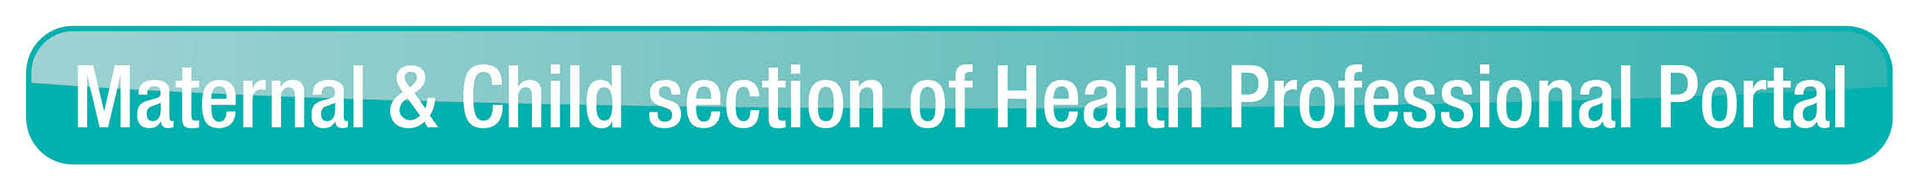 Maternal & Child section of Health Professional Portal button